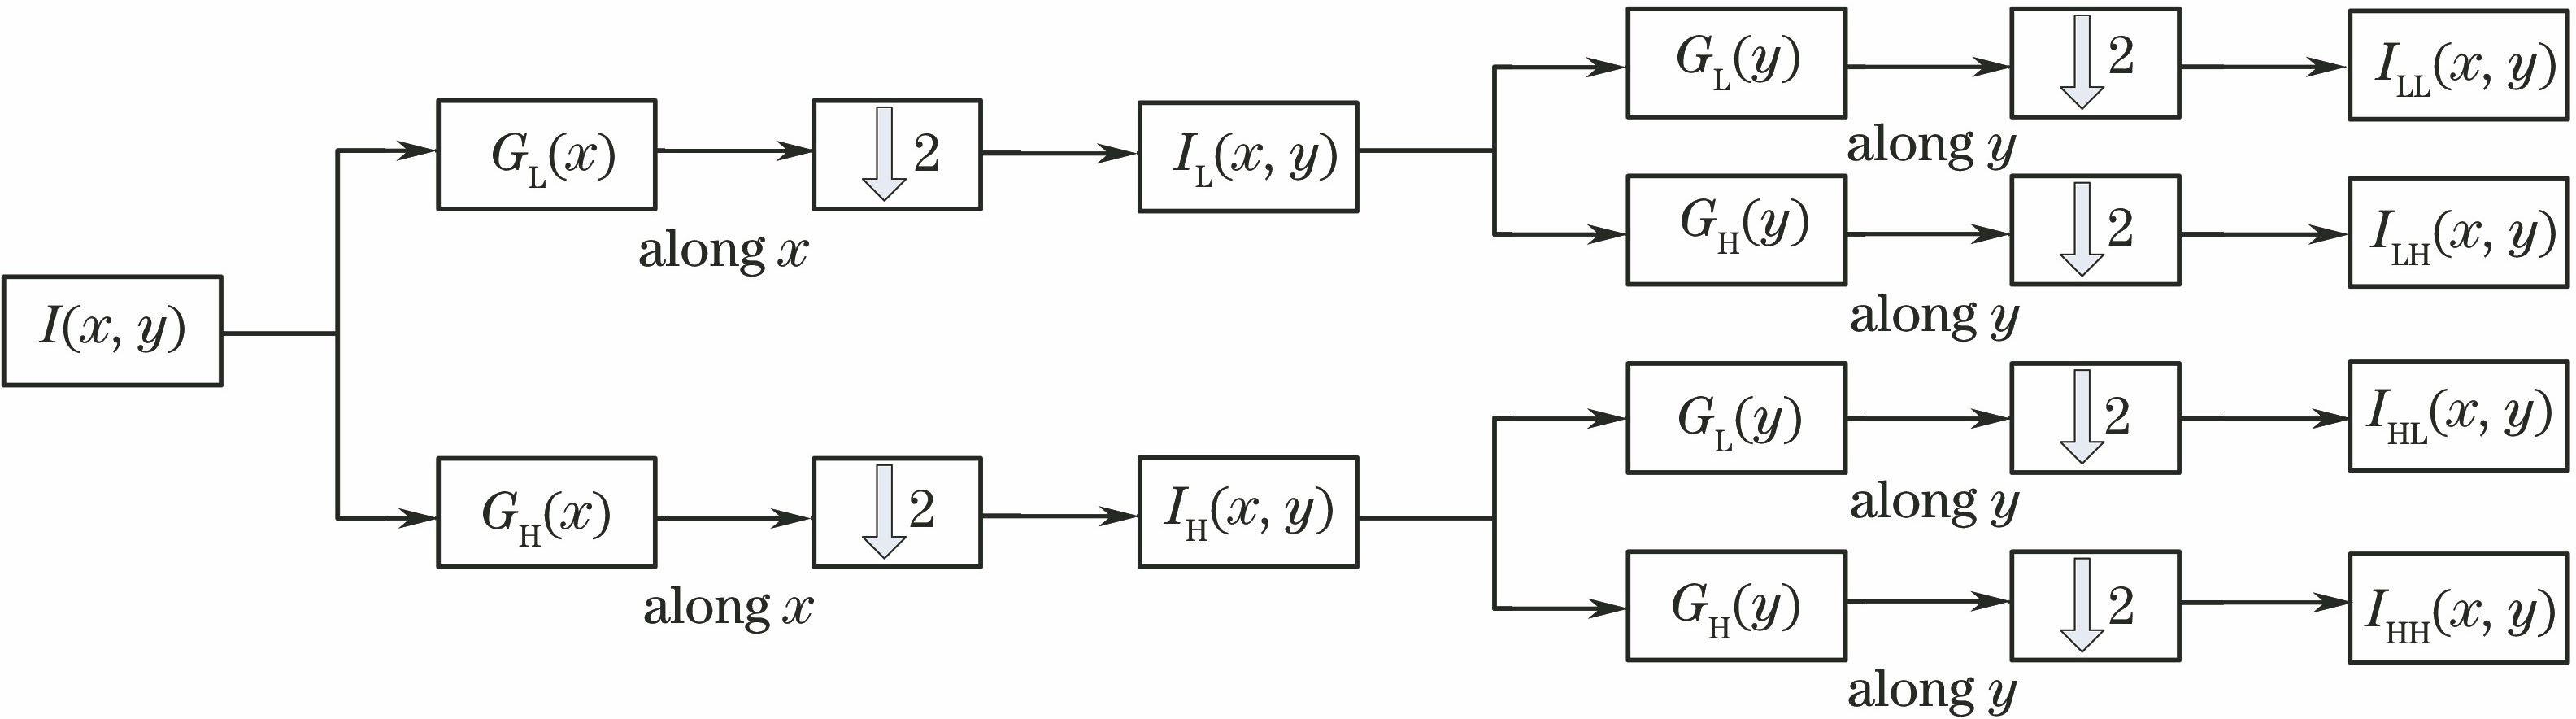 Process of two-dimensional wavelet transform for image I(x, y)